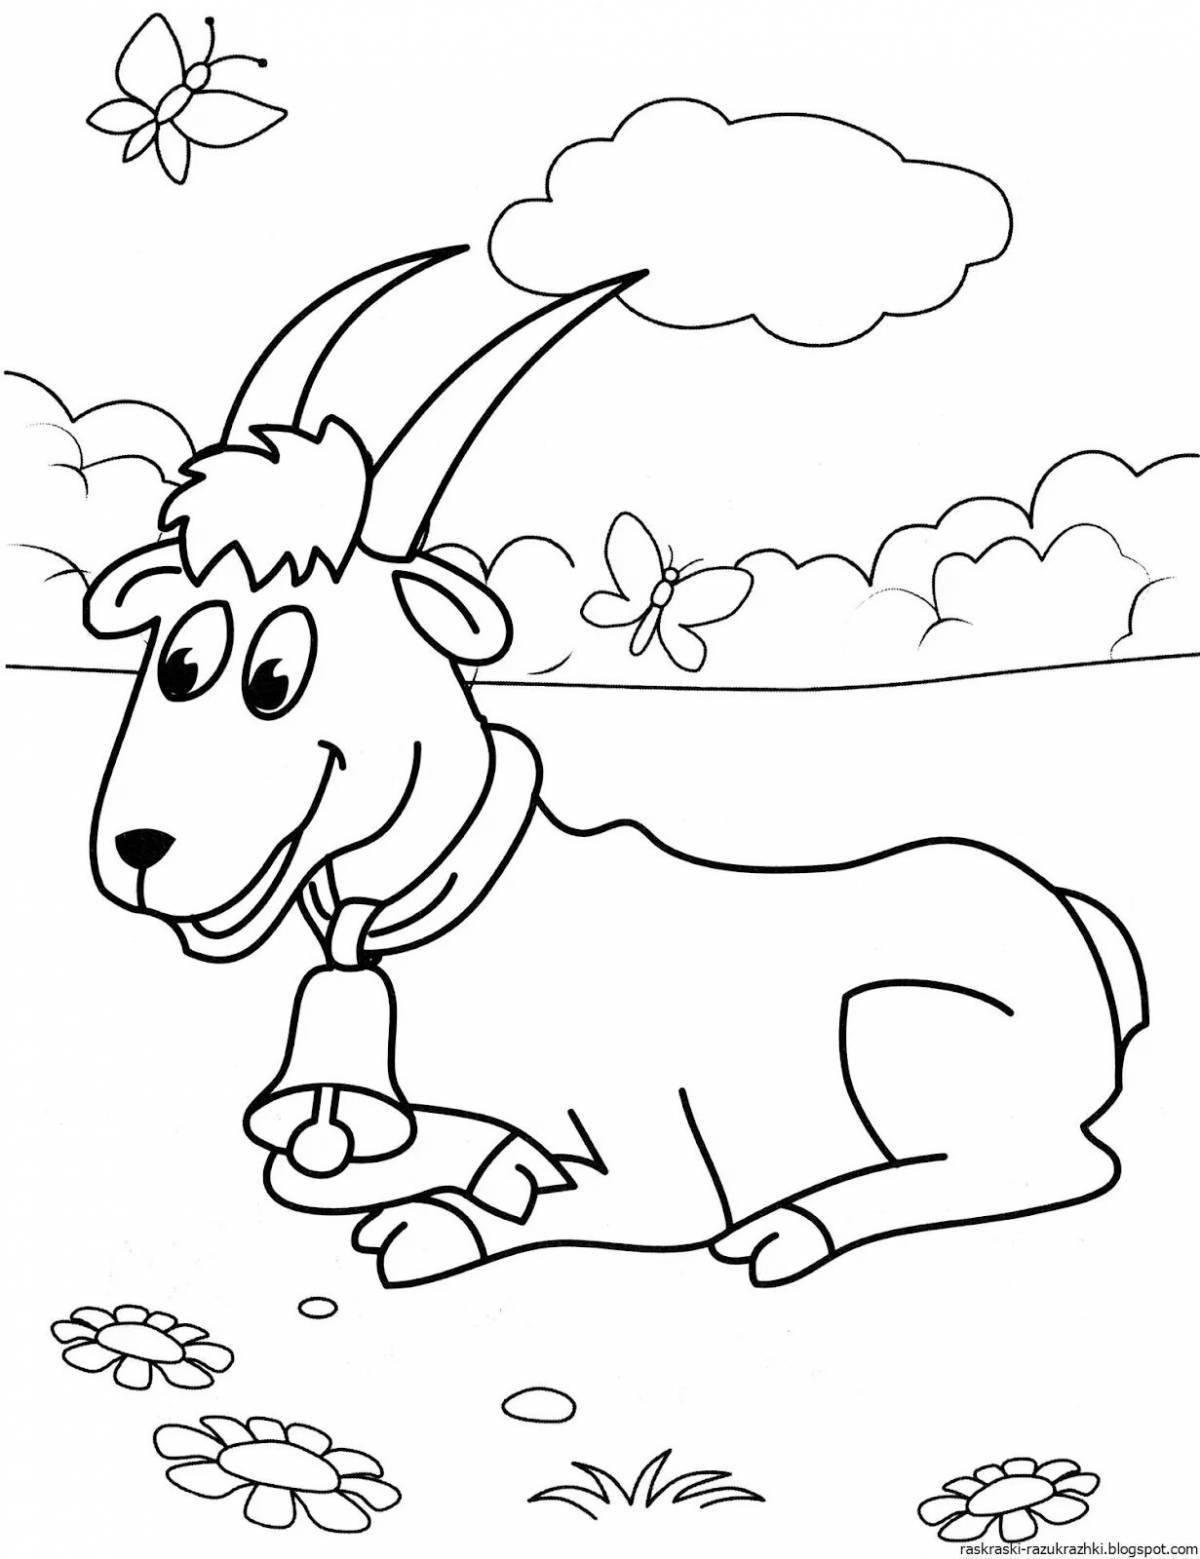 Coloring cute goat for kids